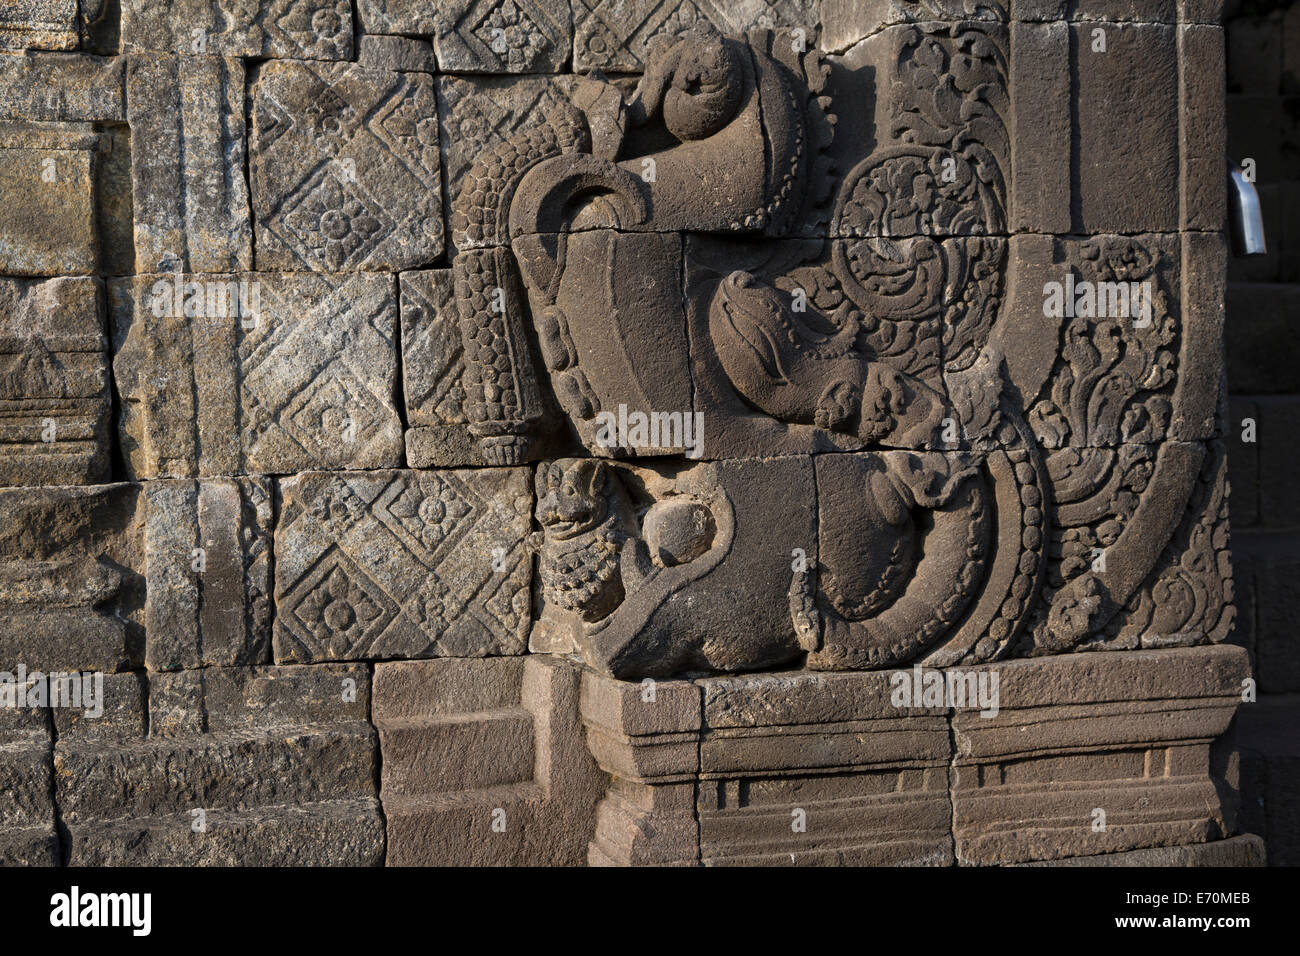 Borobudur, Java, Indonesia.  A Makara, a Hindu-Buddhist Sea Creature, Trunk Tilted up, Small Lion Emerging from the Mouth. Stock Photo